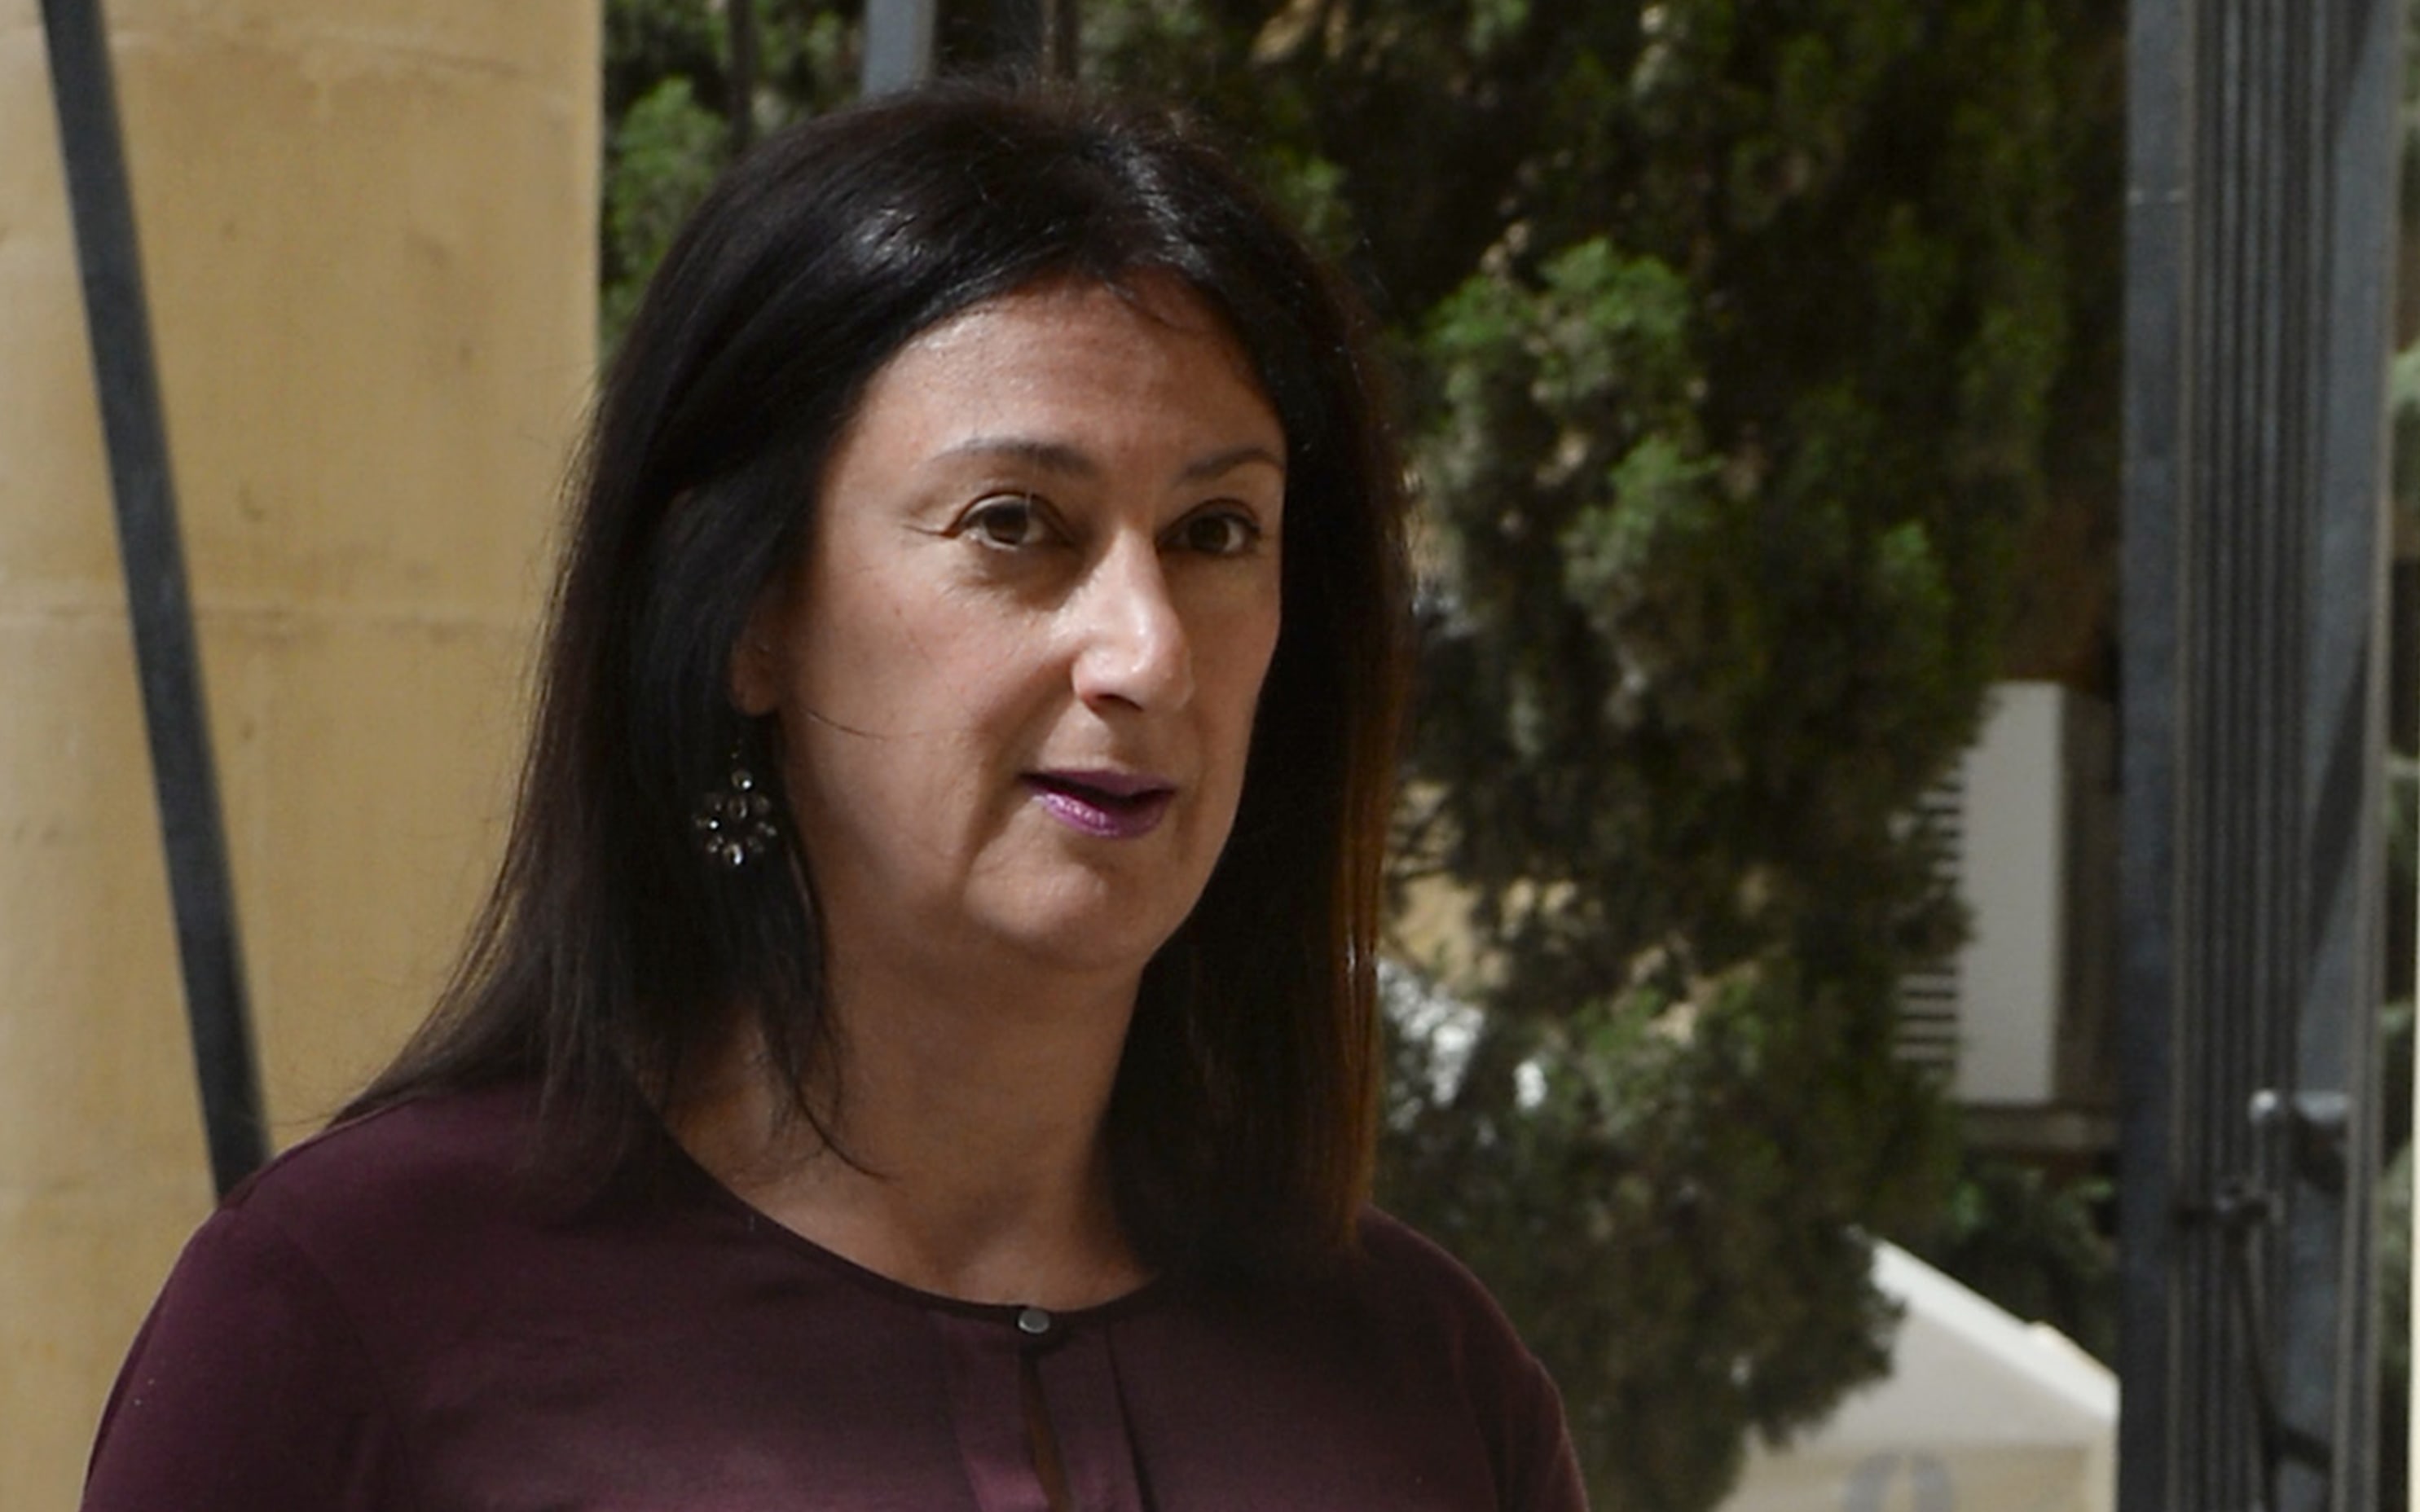 Daphne Capuana Galizia arriving at the Law Court in Malta, in April 2017,